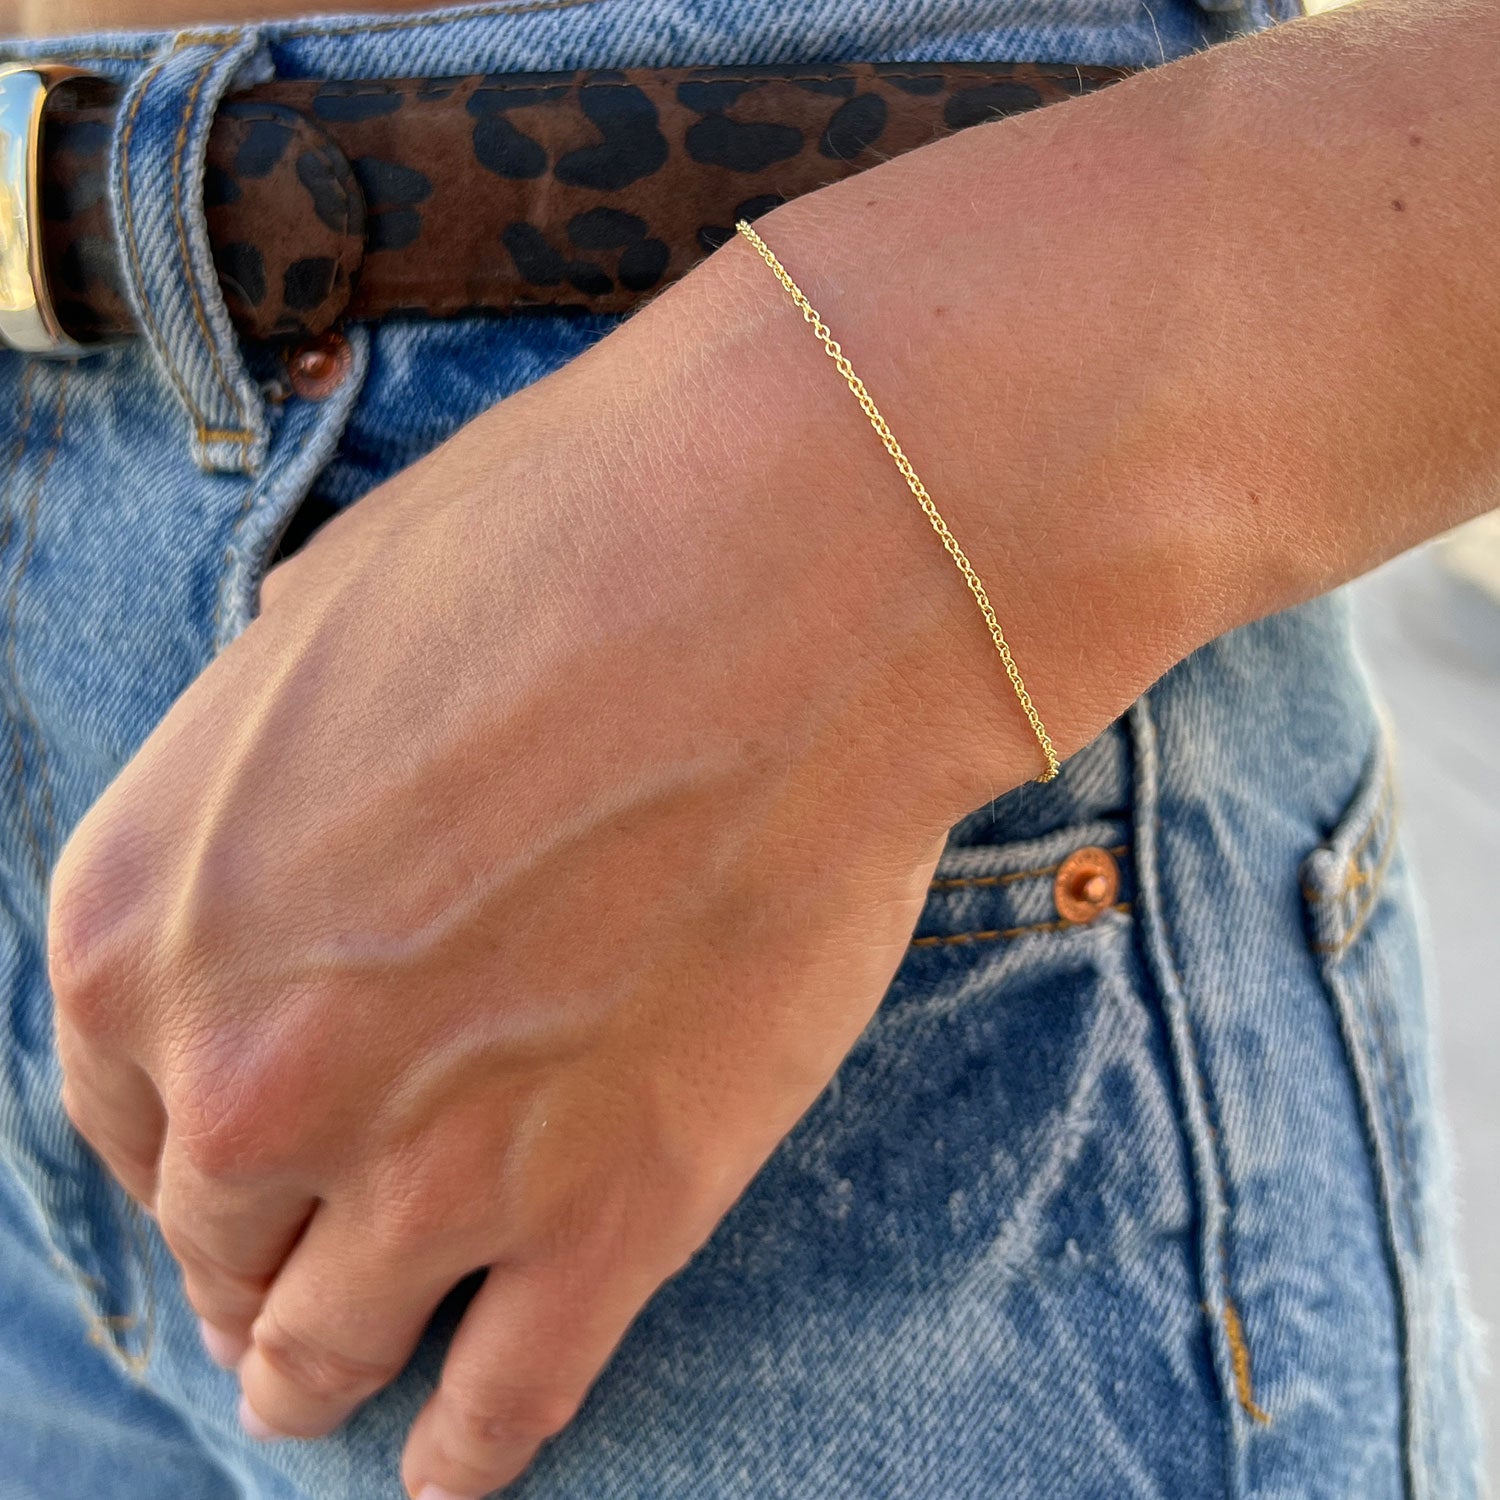 14K Gold Cable Chain Bracelet 14K Rose Gold / 7 - 7.5 (Adjustable) by Baby Gold - Shop Custom Gold Jewelry